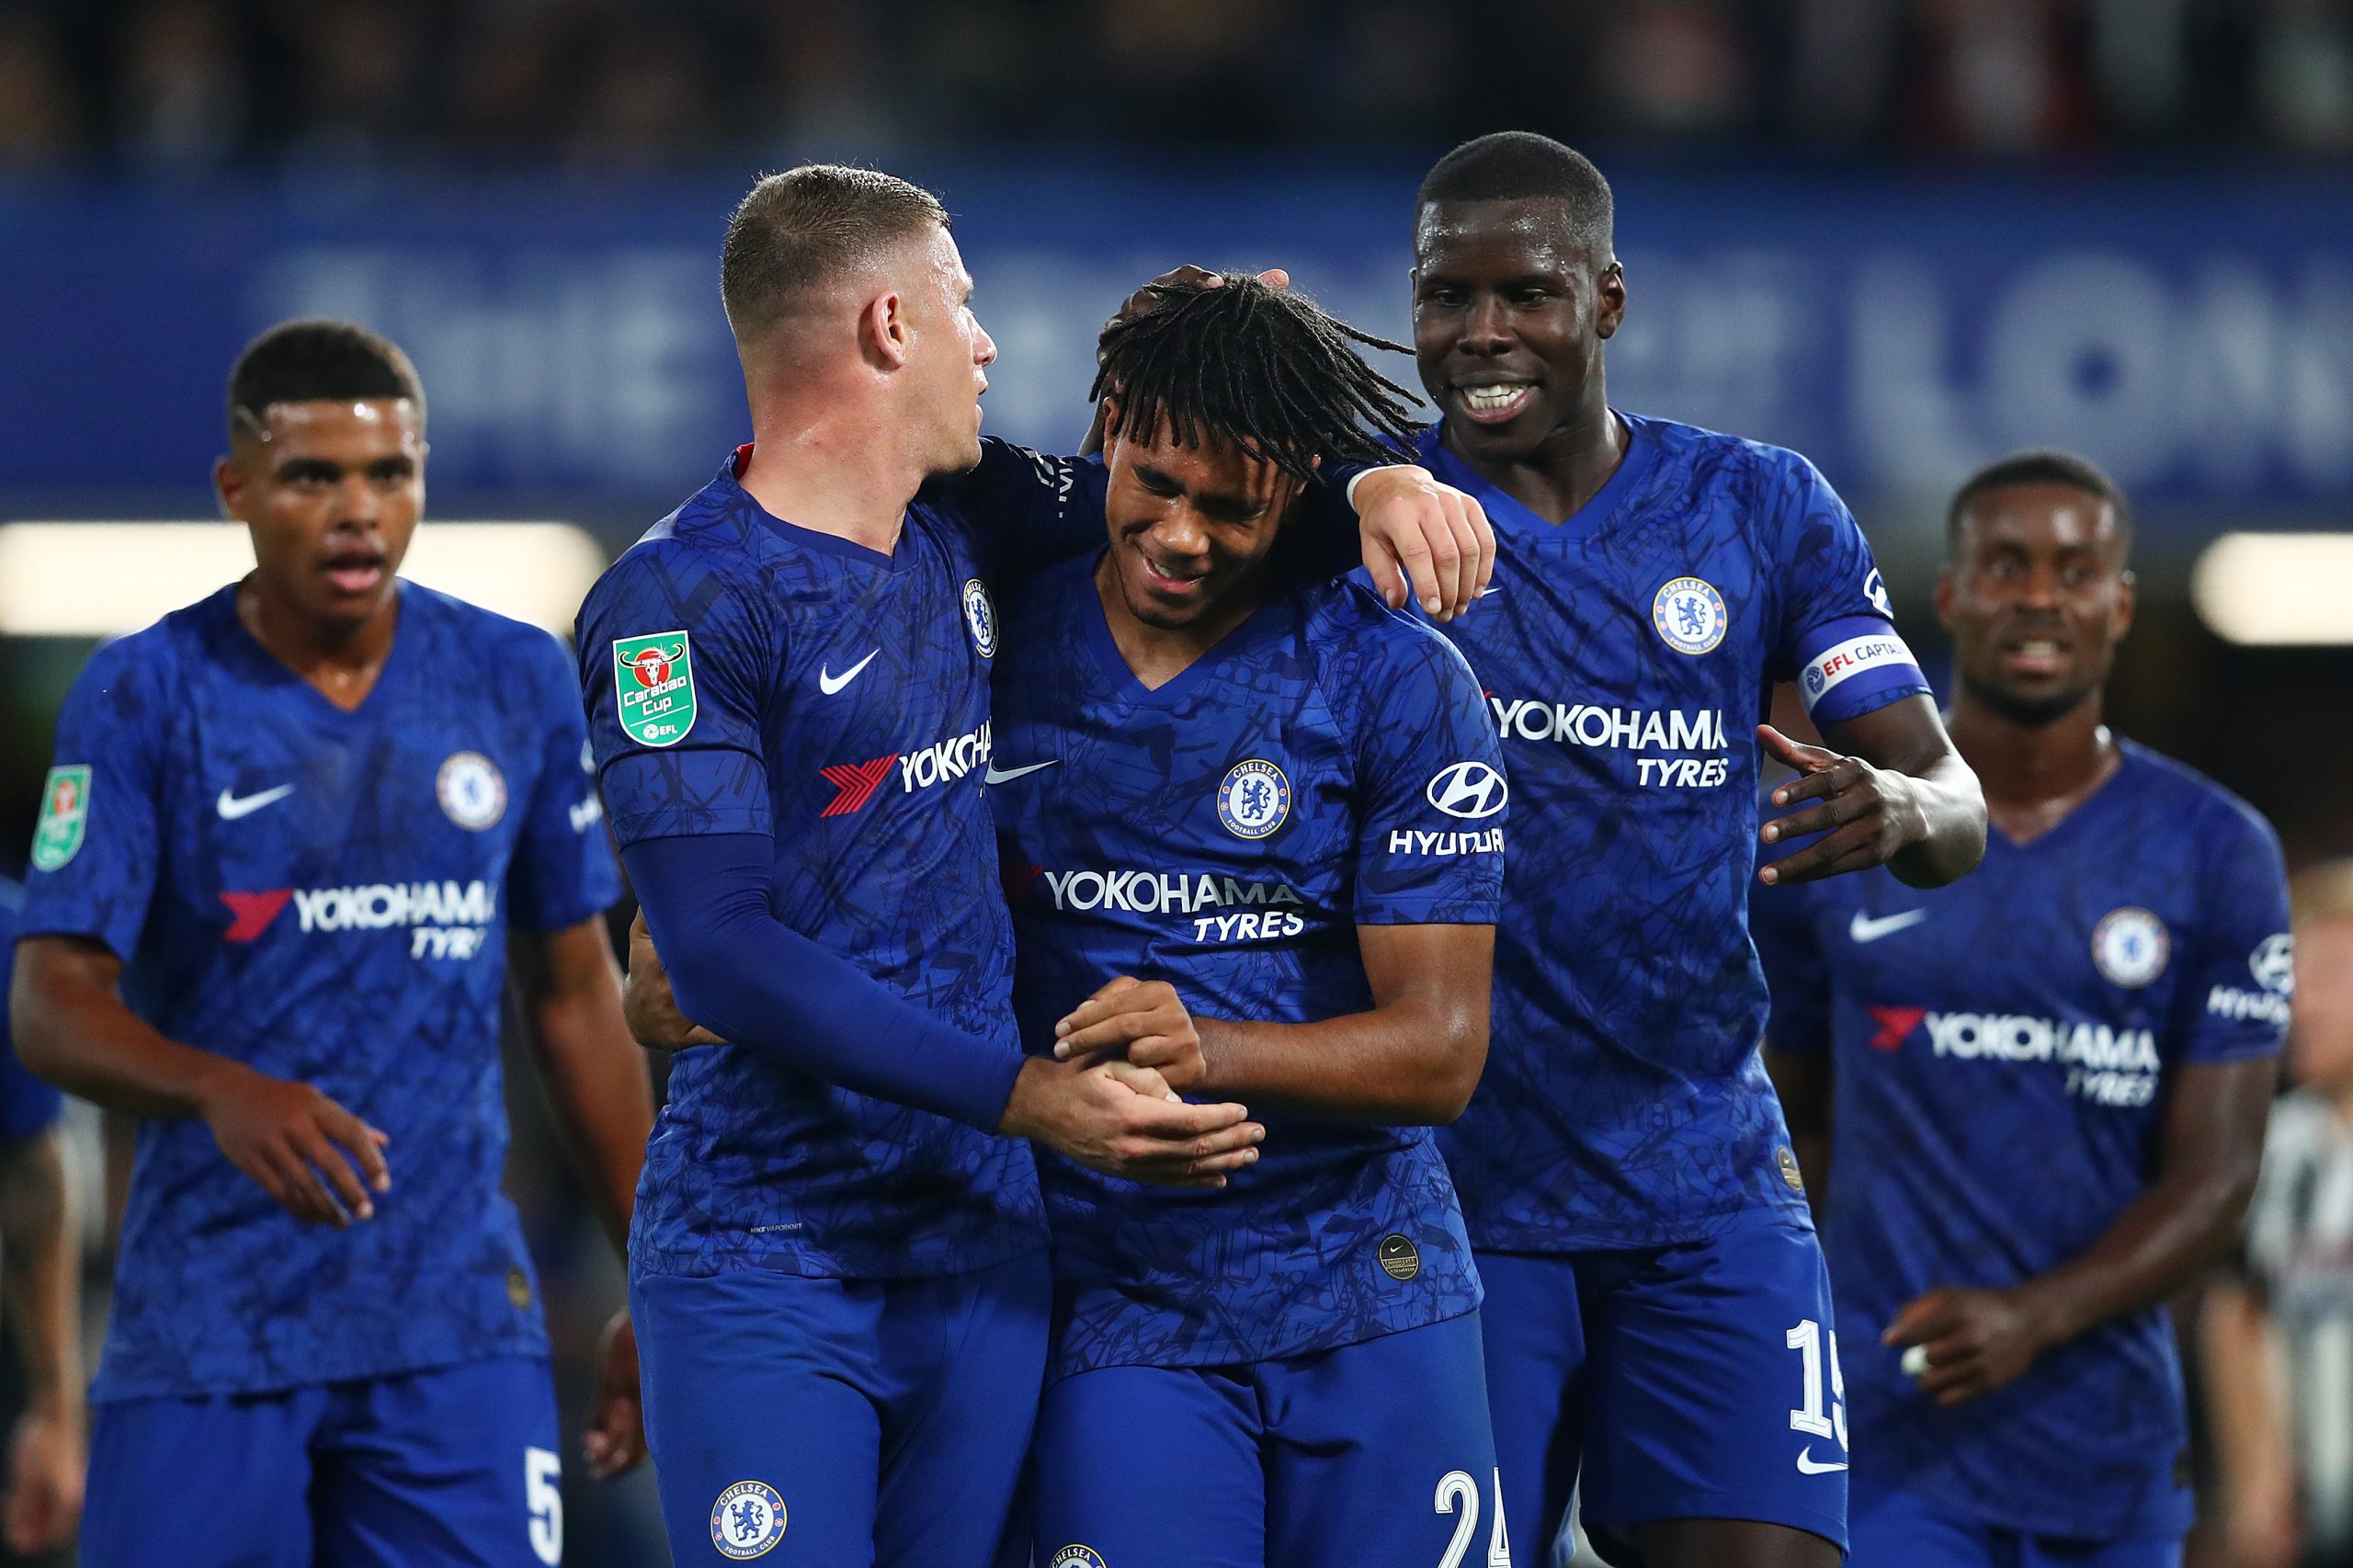 LONDON, ENGLAND - SEPTEMBER 25: Reece James of Chelsea celebrates with Ross Barkley and Kurt Zouma of Chelsea after he scores his sides 5th goal during the Carabao Cup Third Round match between Chelsea FC and Grimsby Town at Stamford Bridge on September 25, 2019 in London, England. (Photo by Dan Istitene/Getty Images)